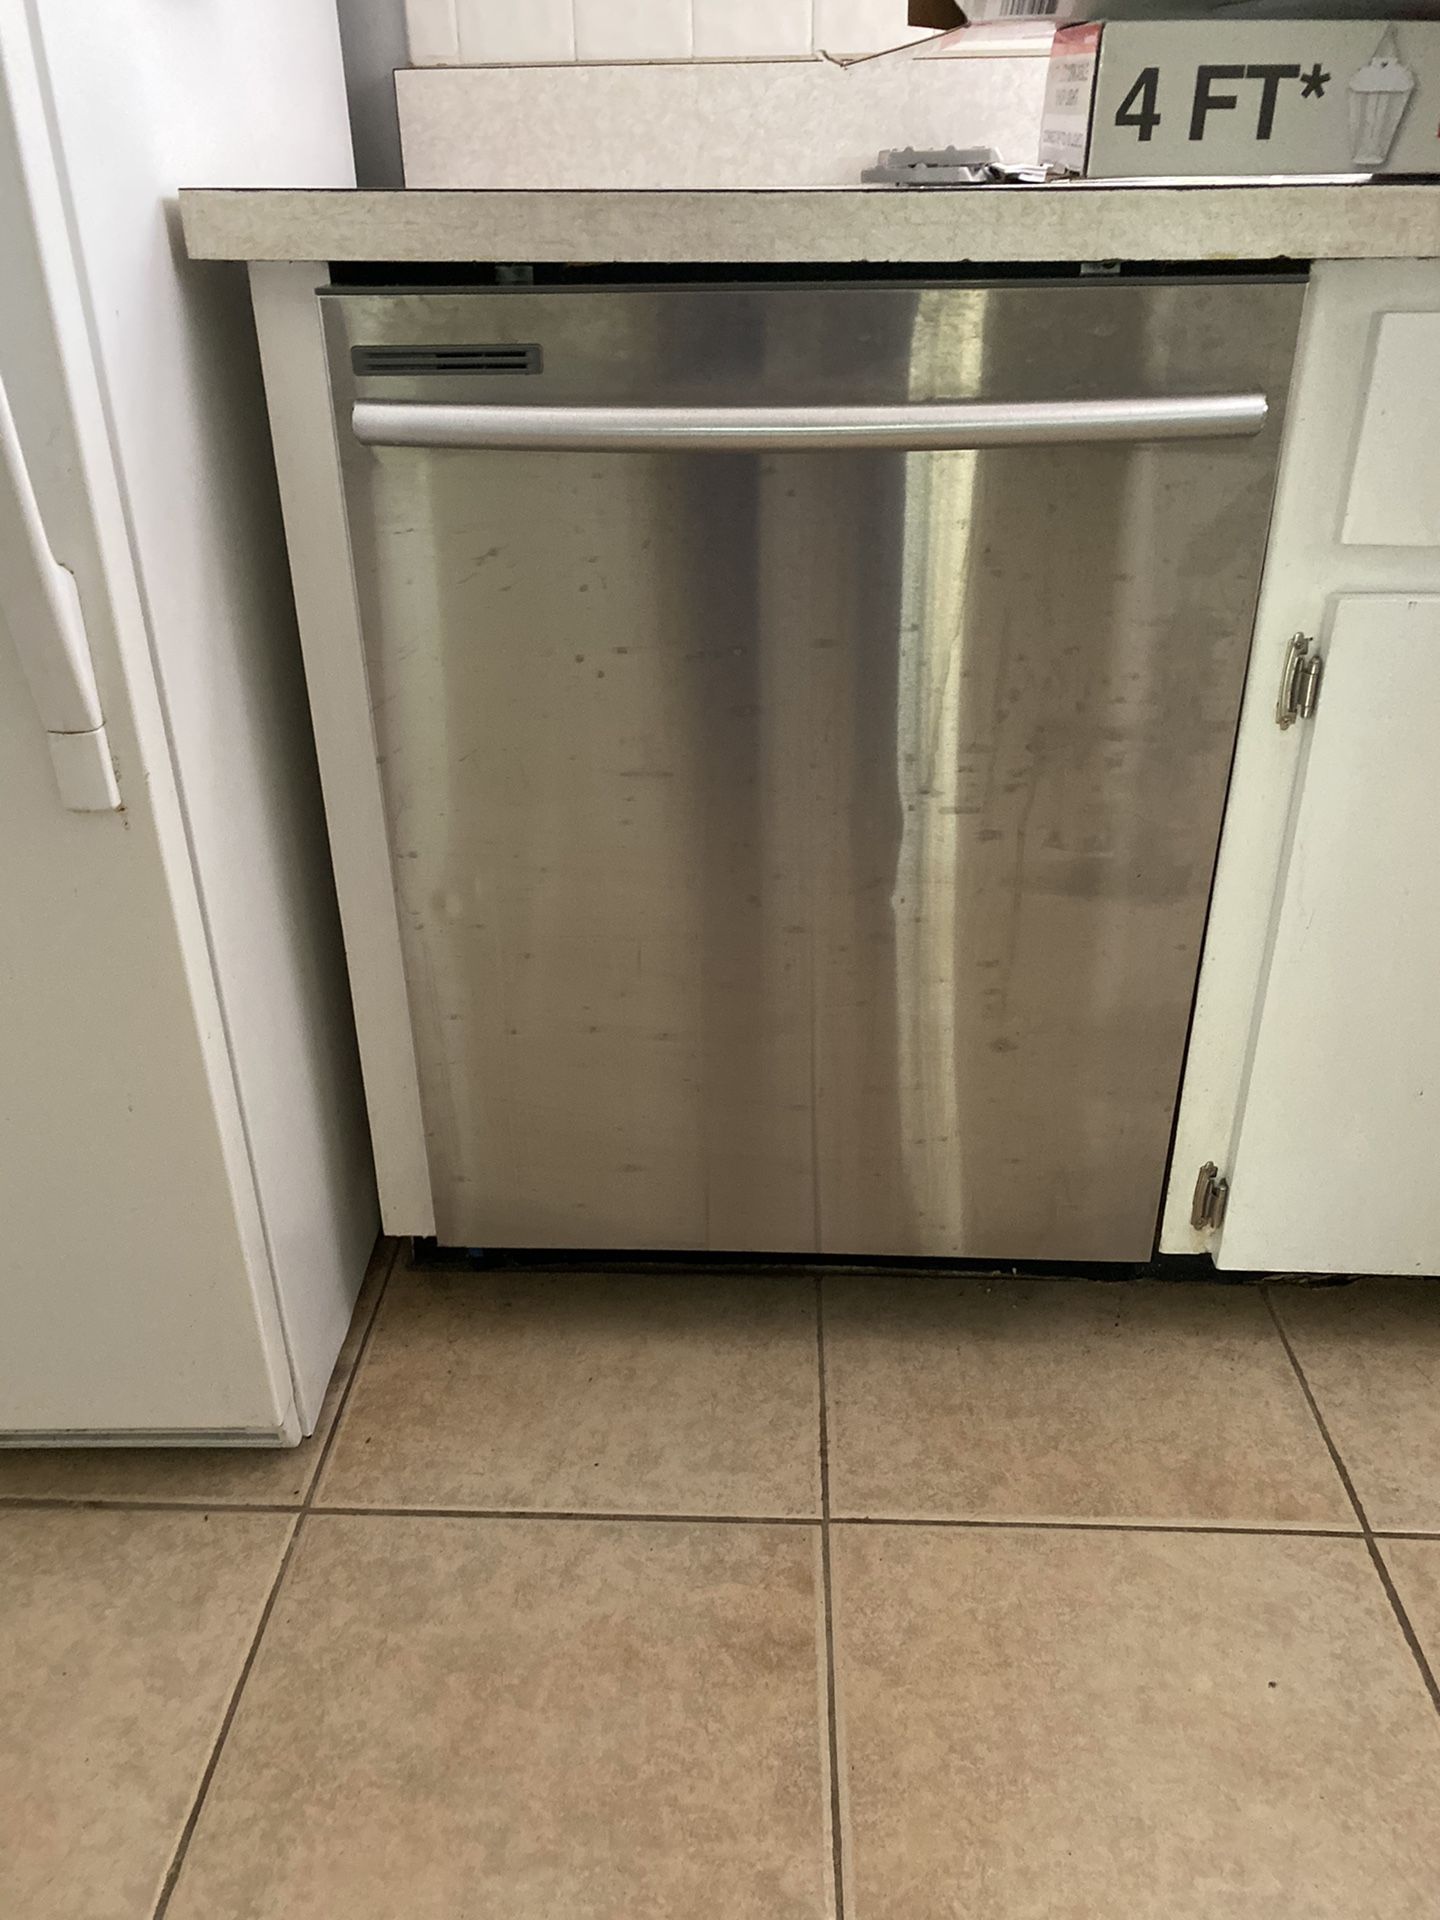 Dishwasher, Samsung, stainless steel, like new.